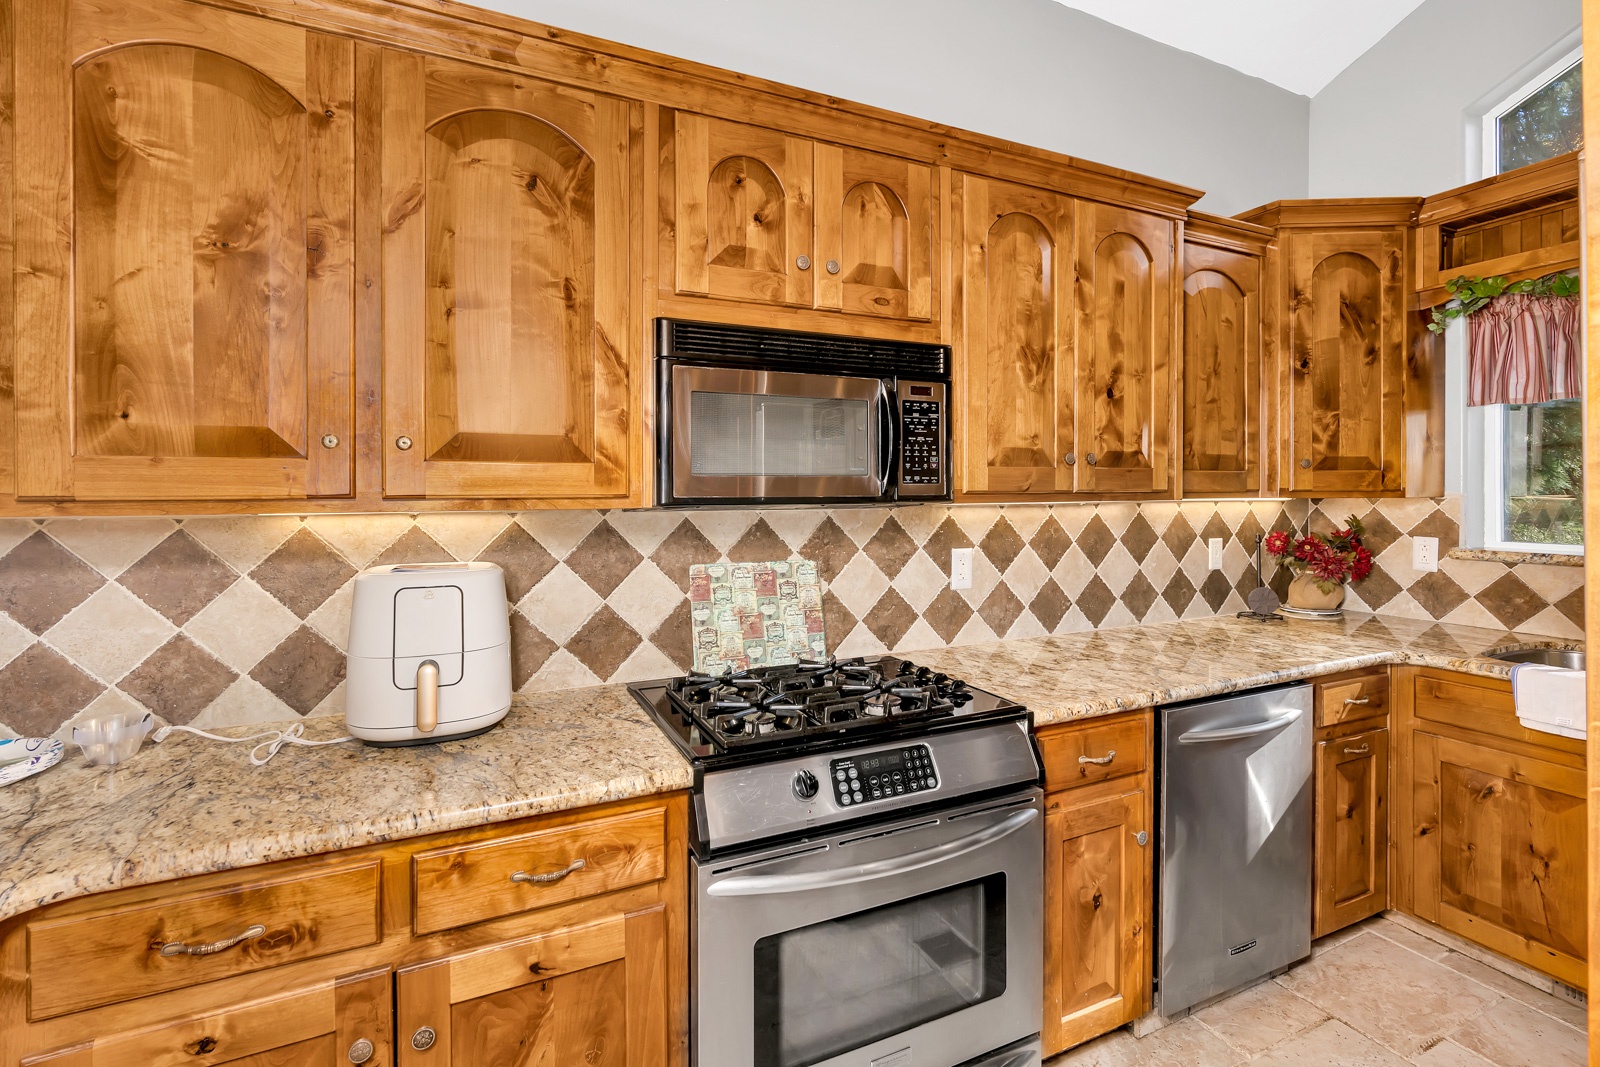 The gorgeous kitchen offers ample space & all the comforts of home